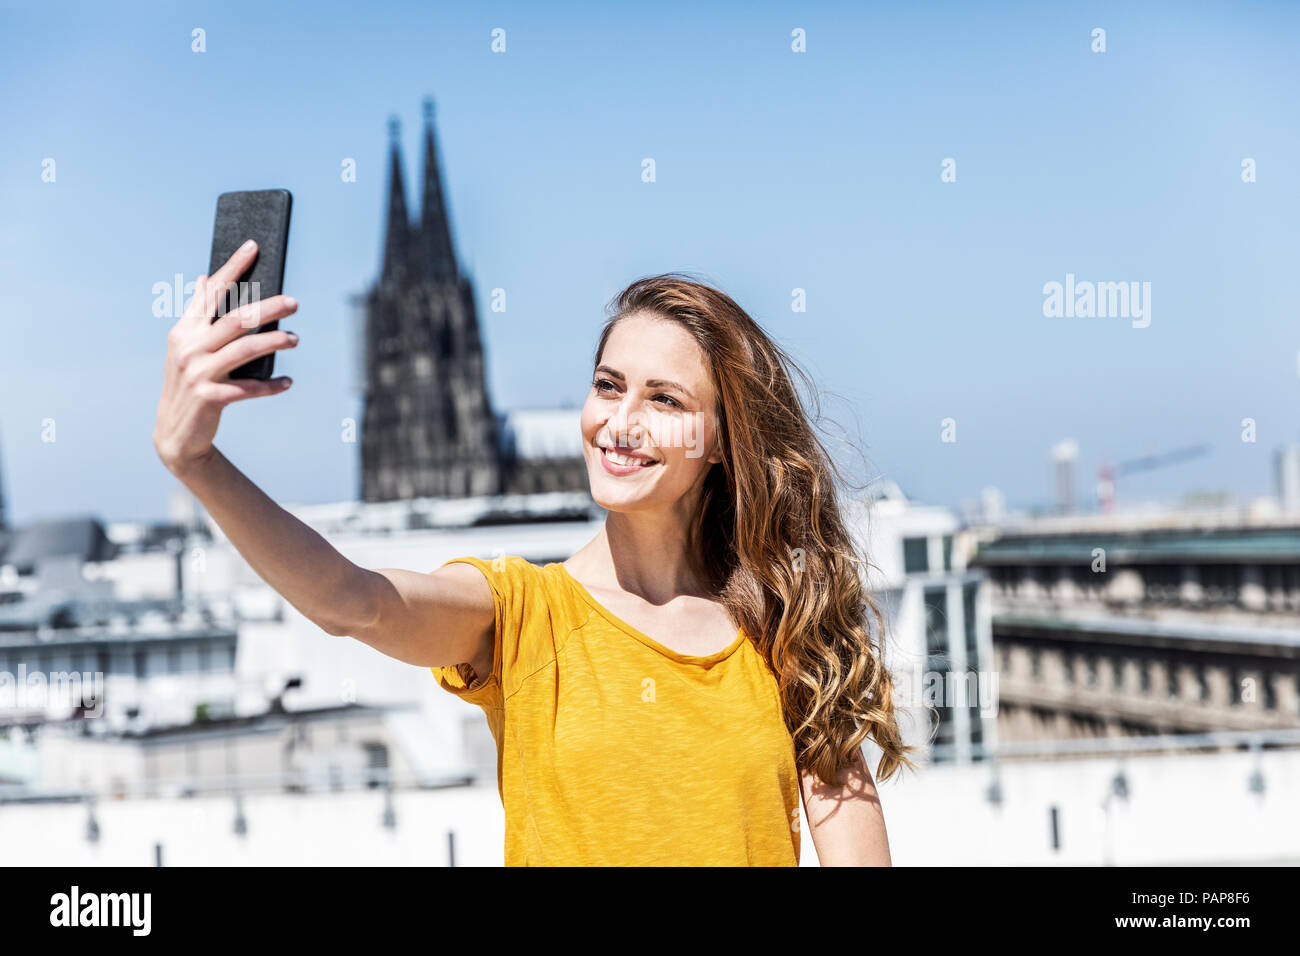 Germany, Cologne, portrait of smiling woman taking selfie with smartphone on roof terrace Stock Photo